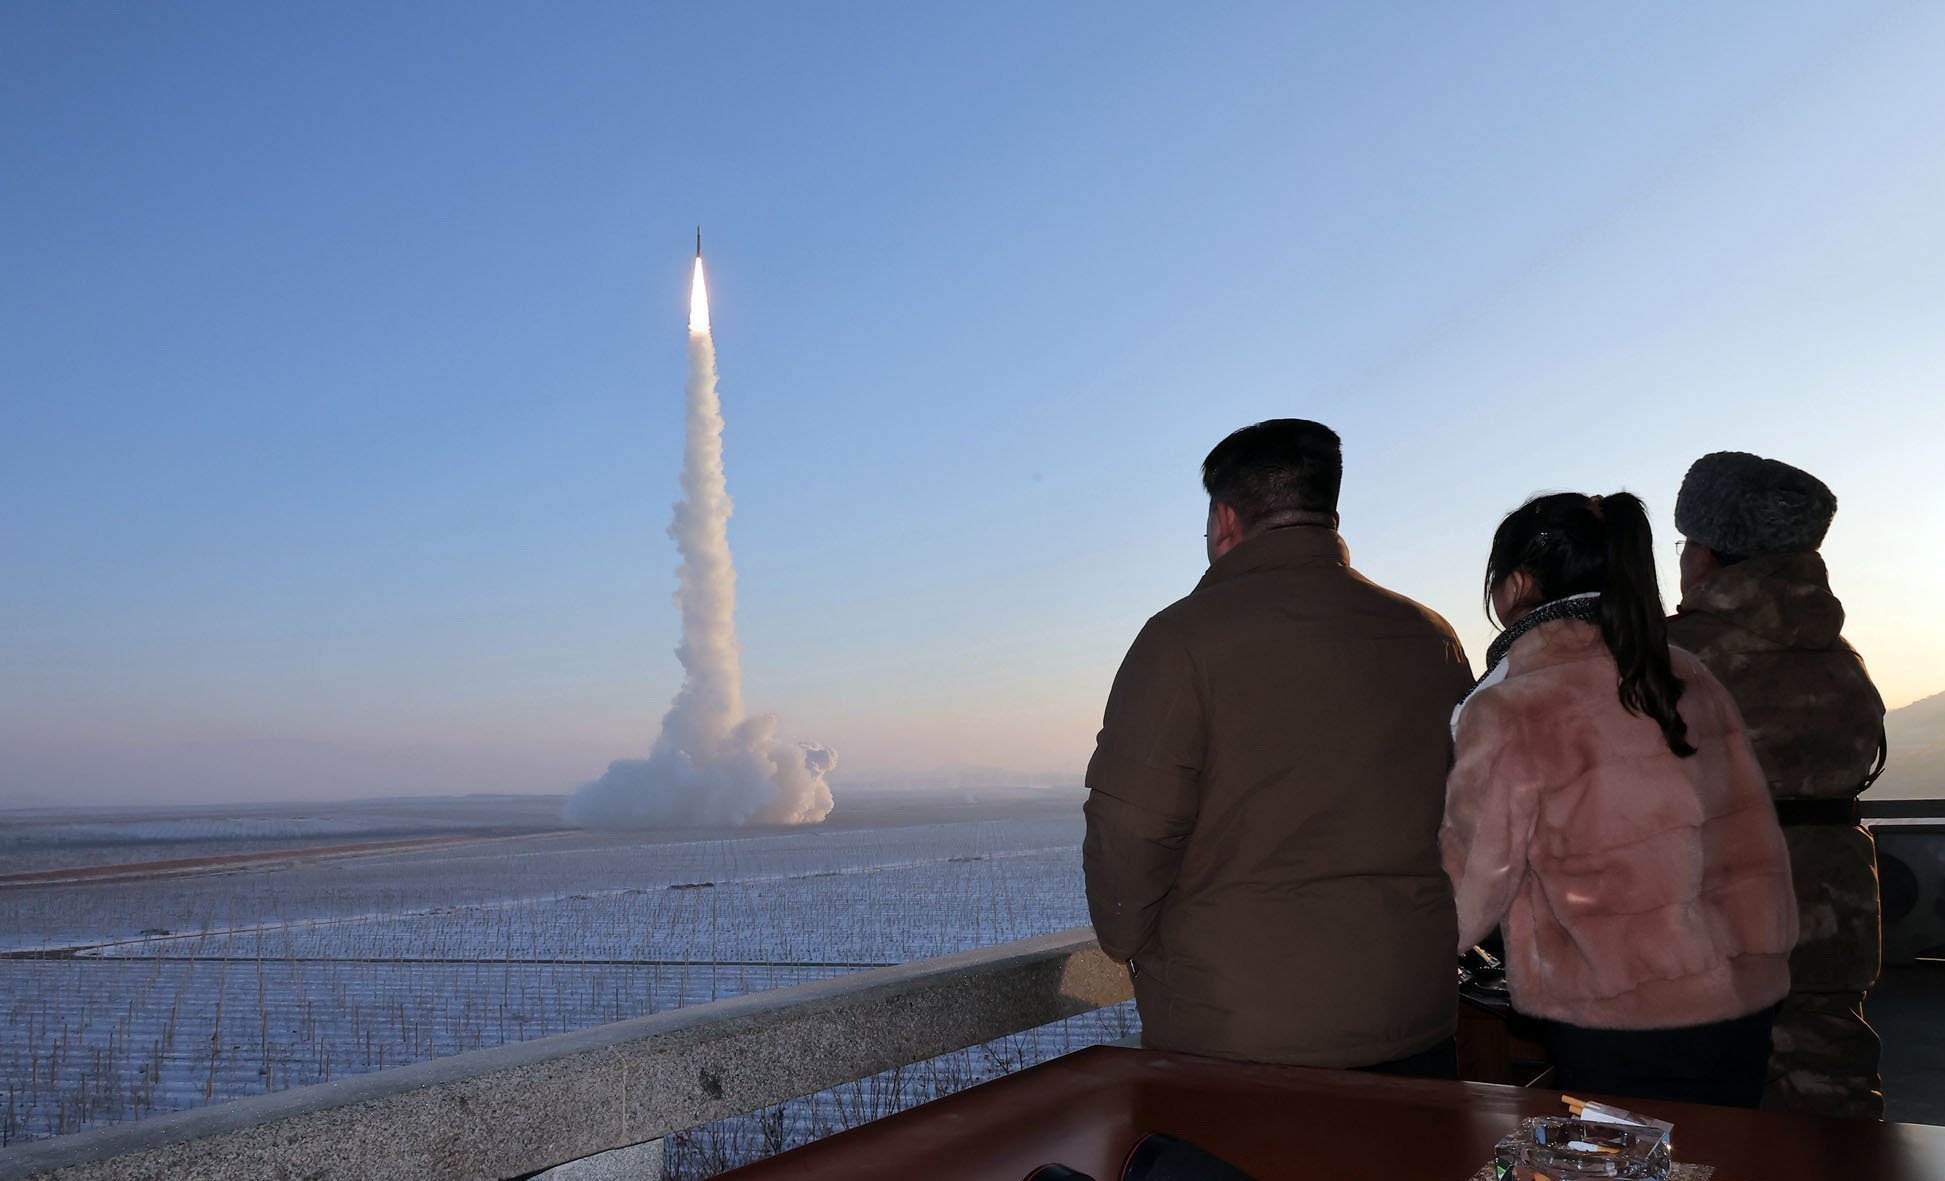 An image released by North Korean news agency KCNA shows the country’s leader, Kim Jong-un (left), and his daughter Kim Ju-ae (second left) watching a test launch of an intercontinental ballistic missile at an undisclosed location on Monday. Photo: KCNA/KNS/dpa